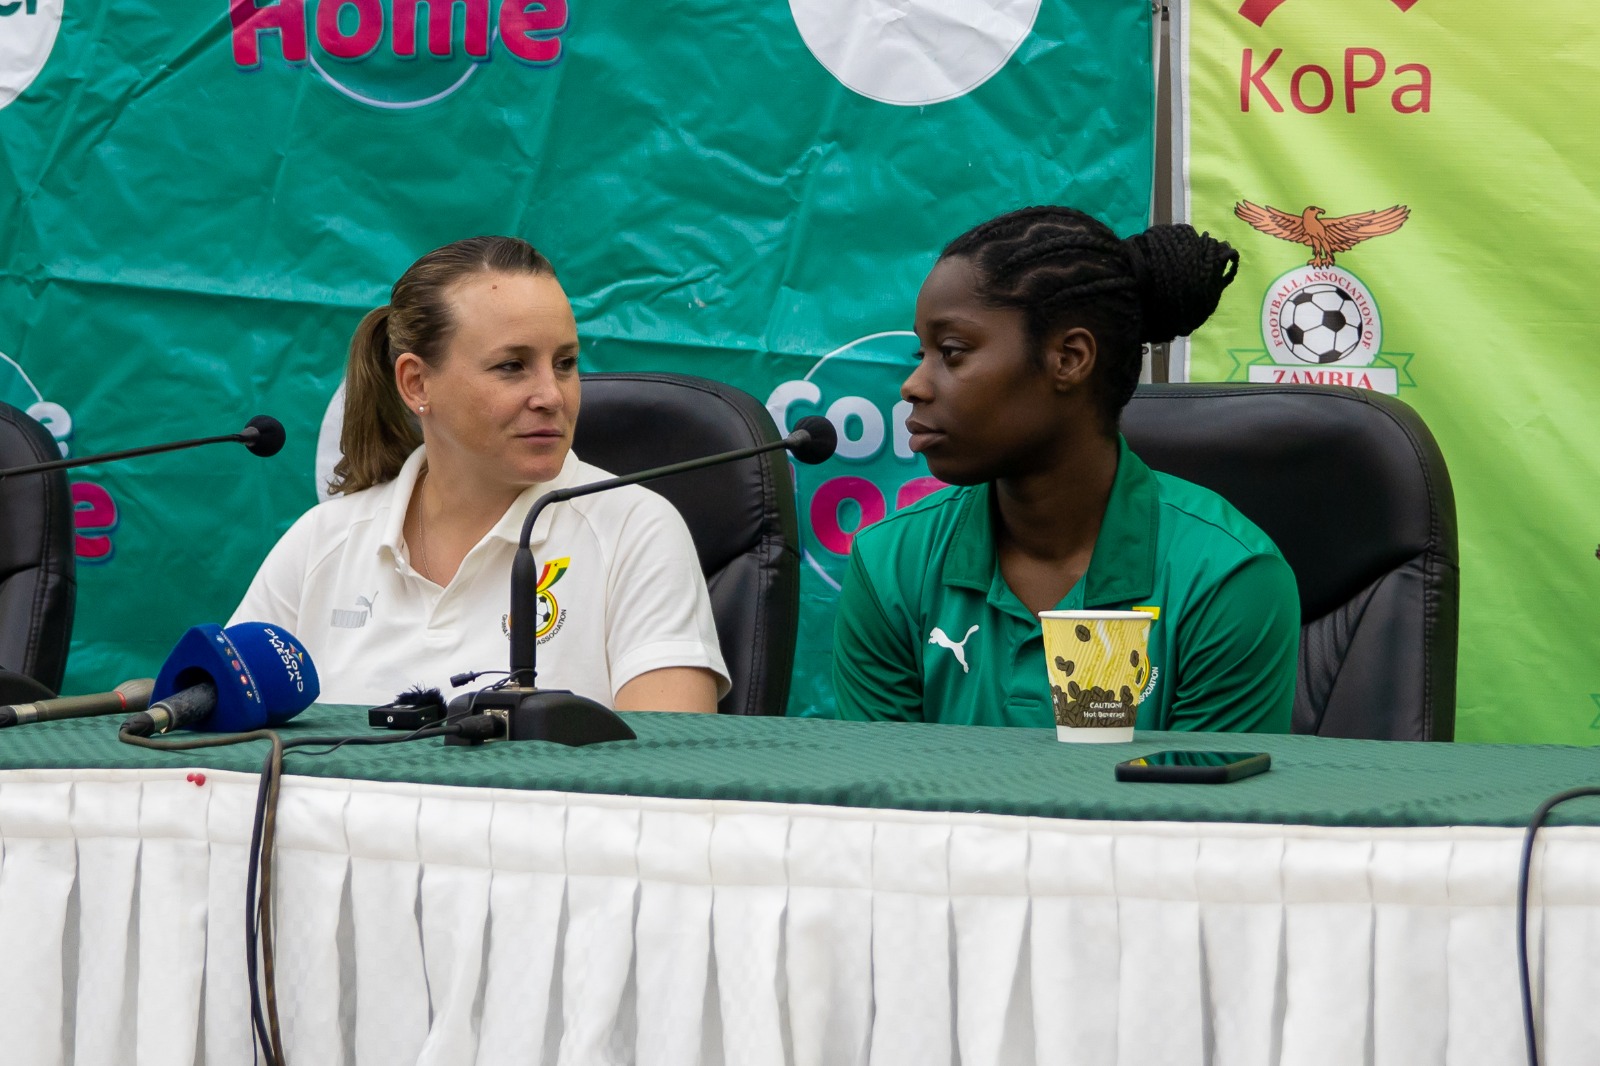 Our approach is to be stable in the game - Nora Häuptle on Zambia